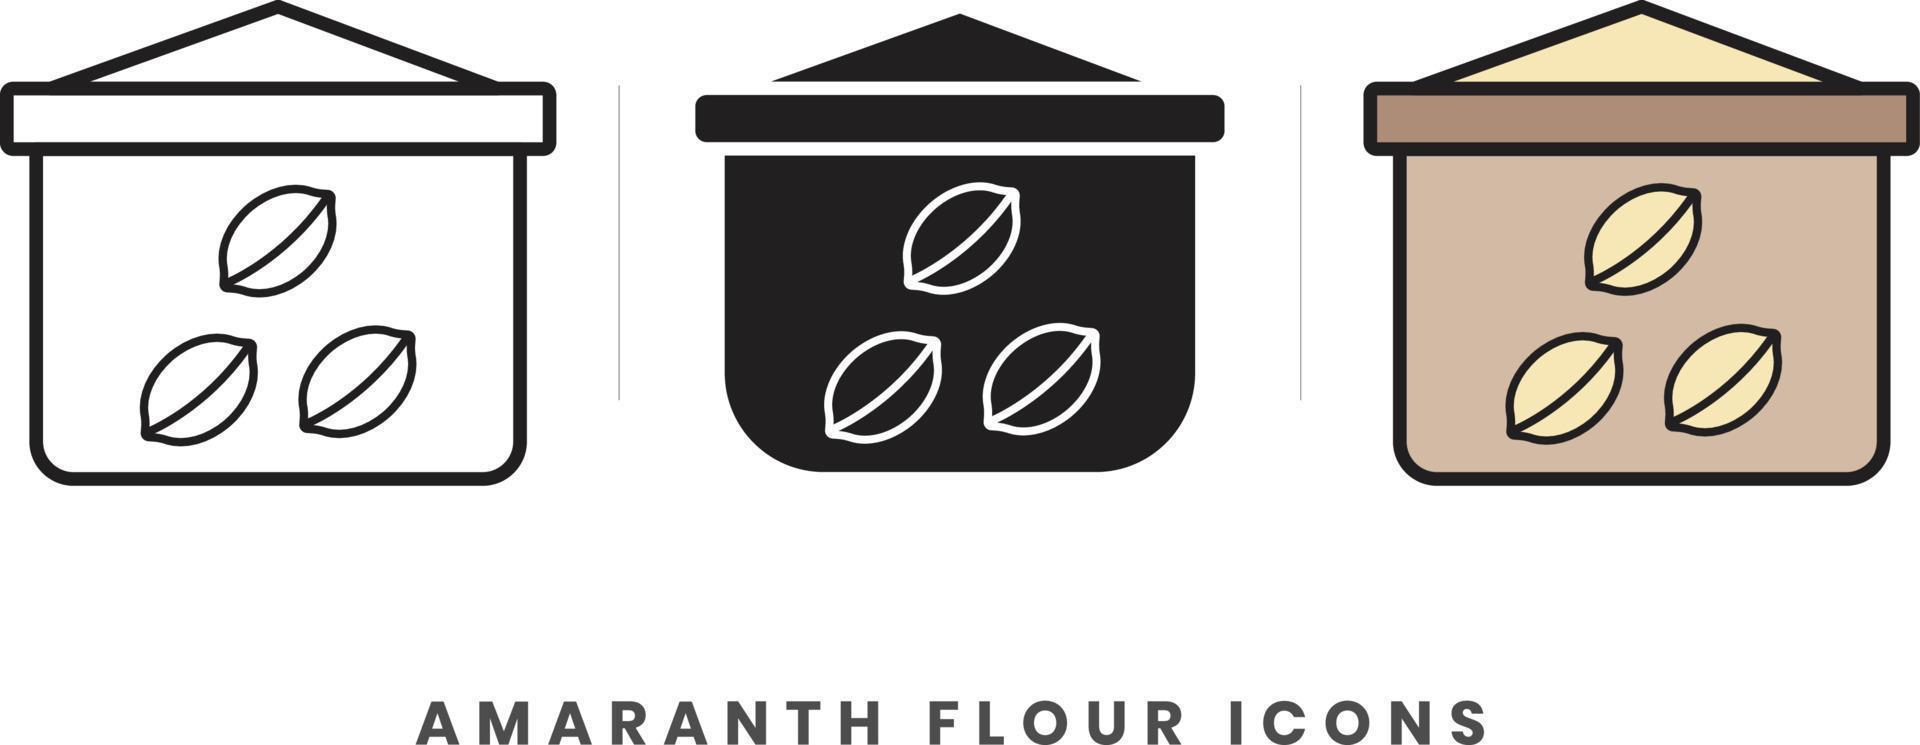 Amaranth flour icon. In lineart, outline, solid, colored styles. For wesite design, mobile app, software vector